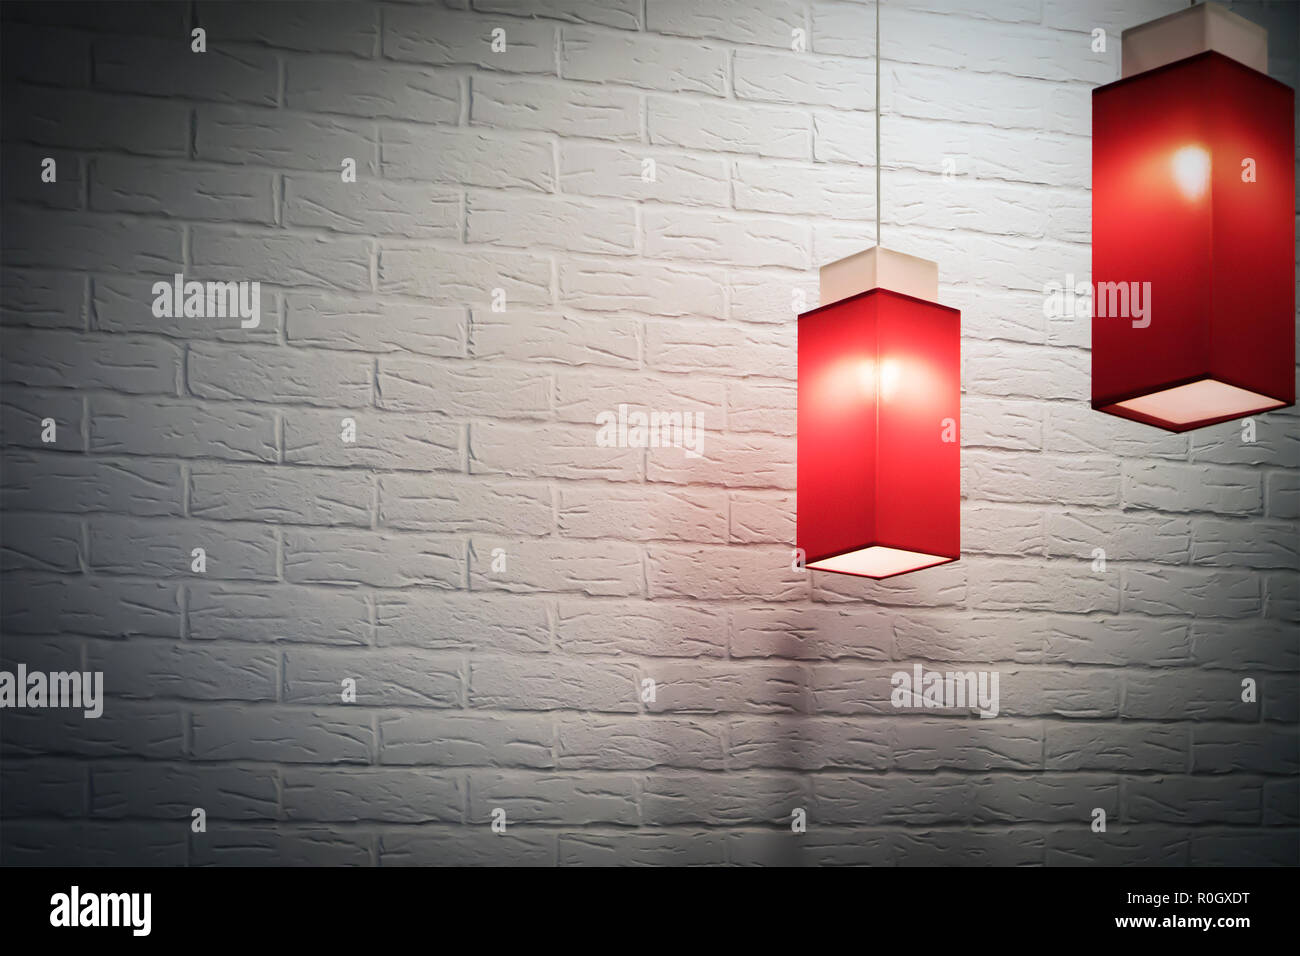 wo red elongated square pendant electric lamps against white brick wall, darkened vignette Stock Photo